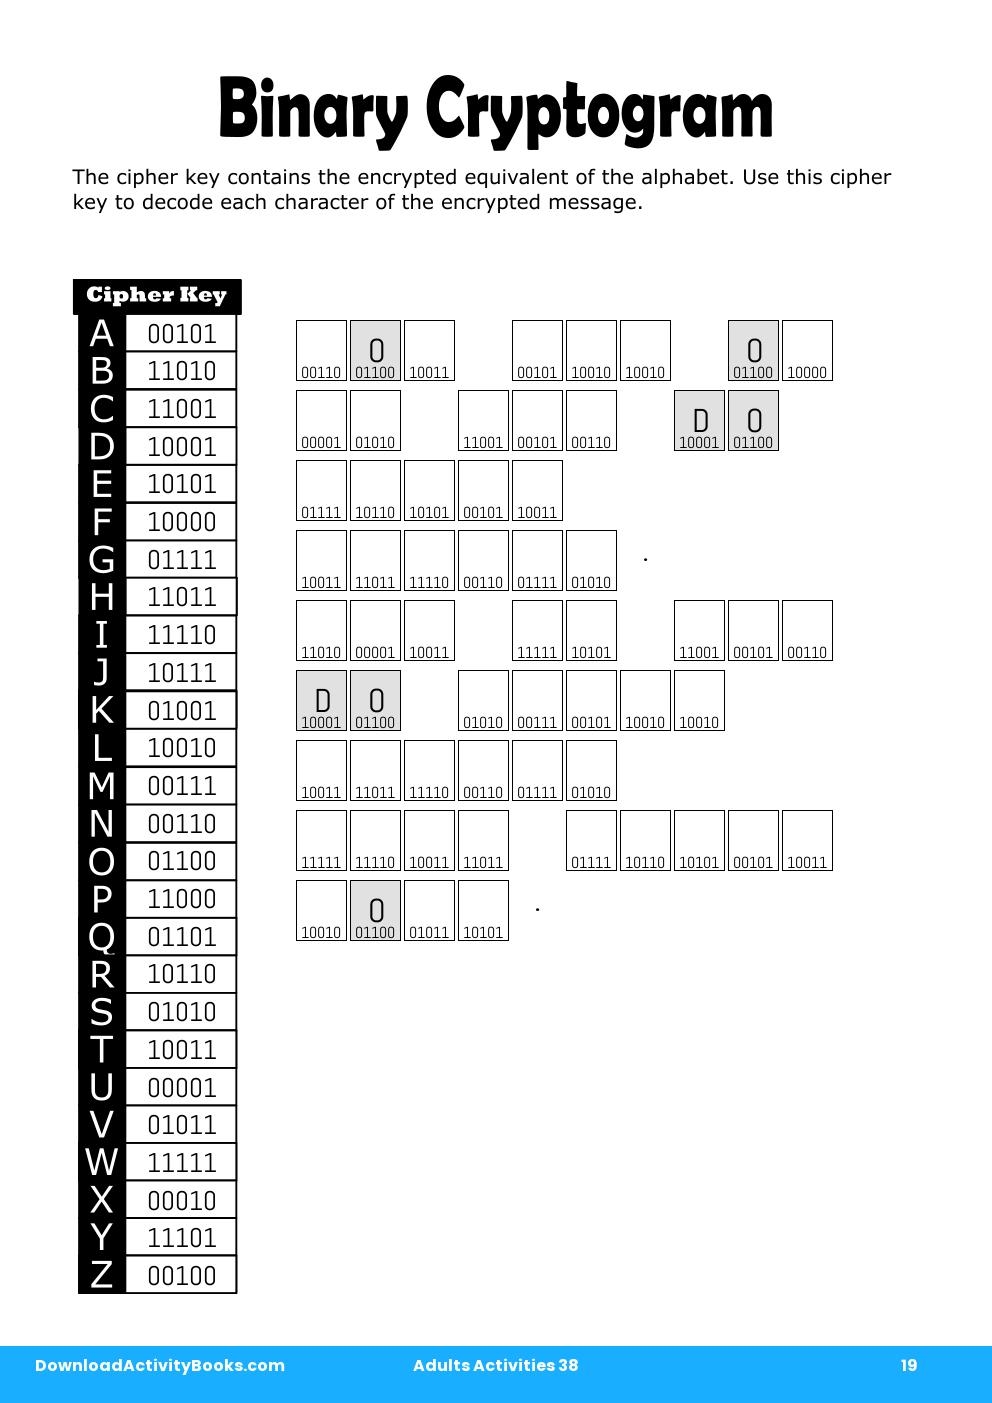 Binary Cryptogram in Adults Activities 38